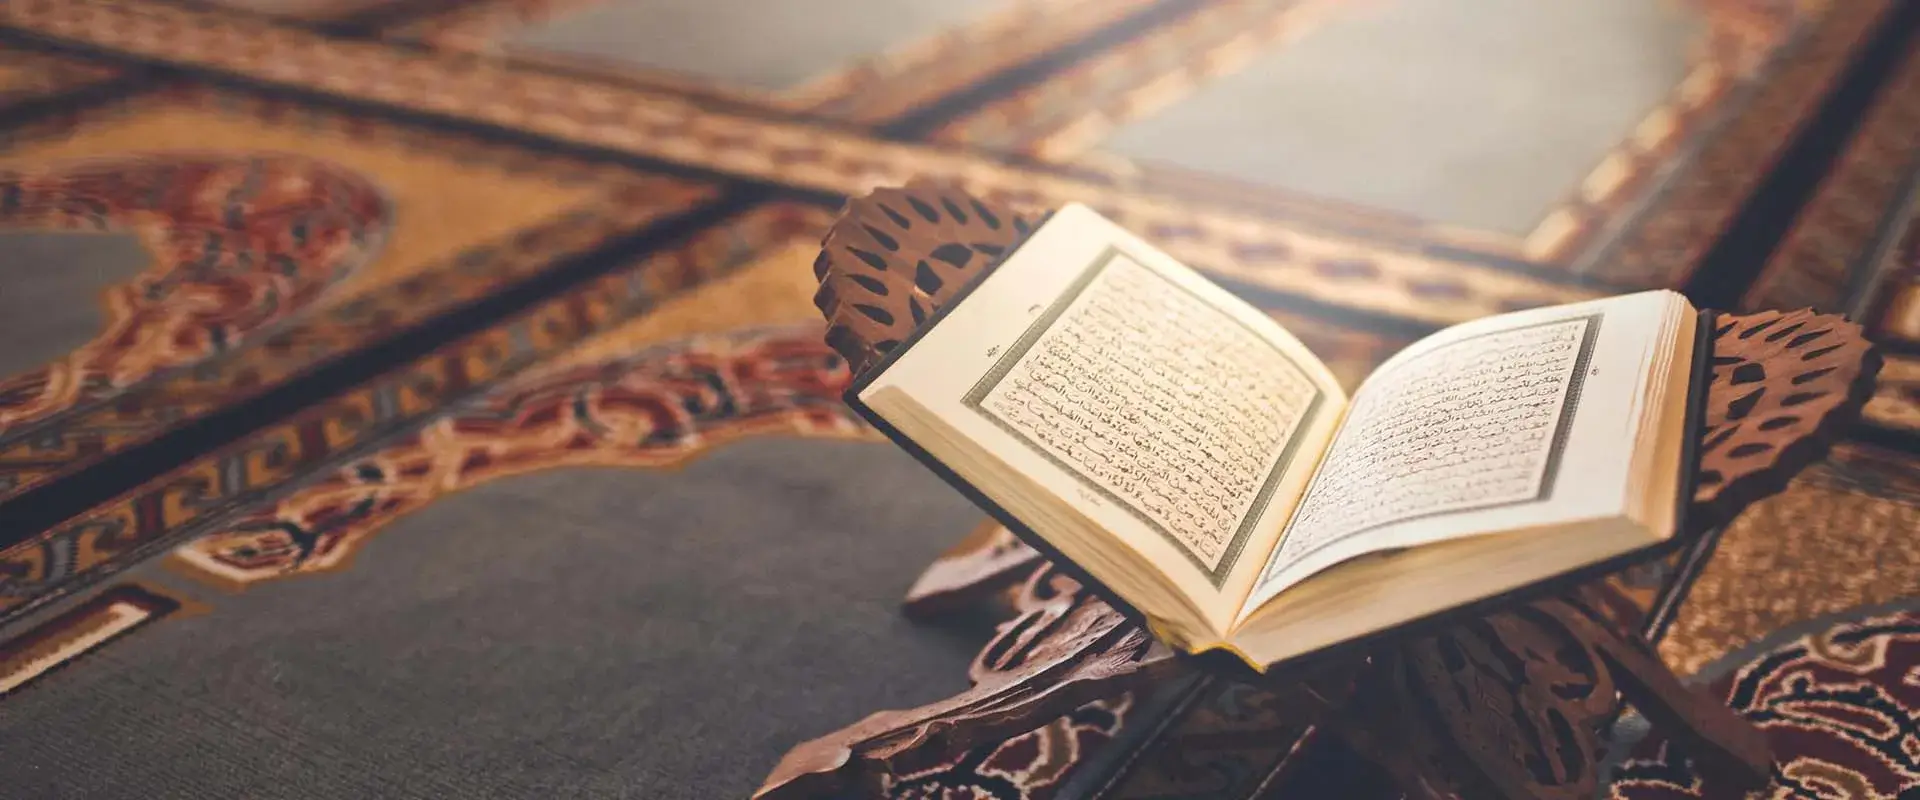 The significance of Nuzul al-Quran goes beyond a mere historical event 